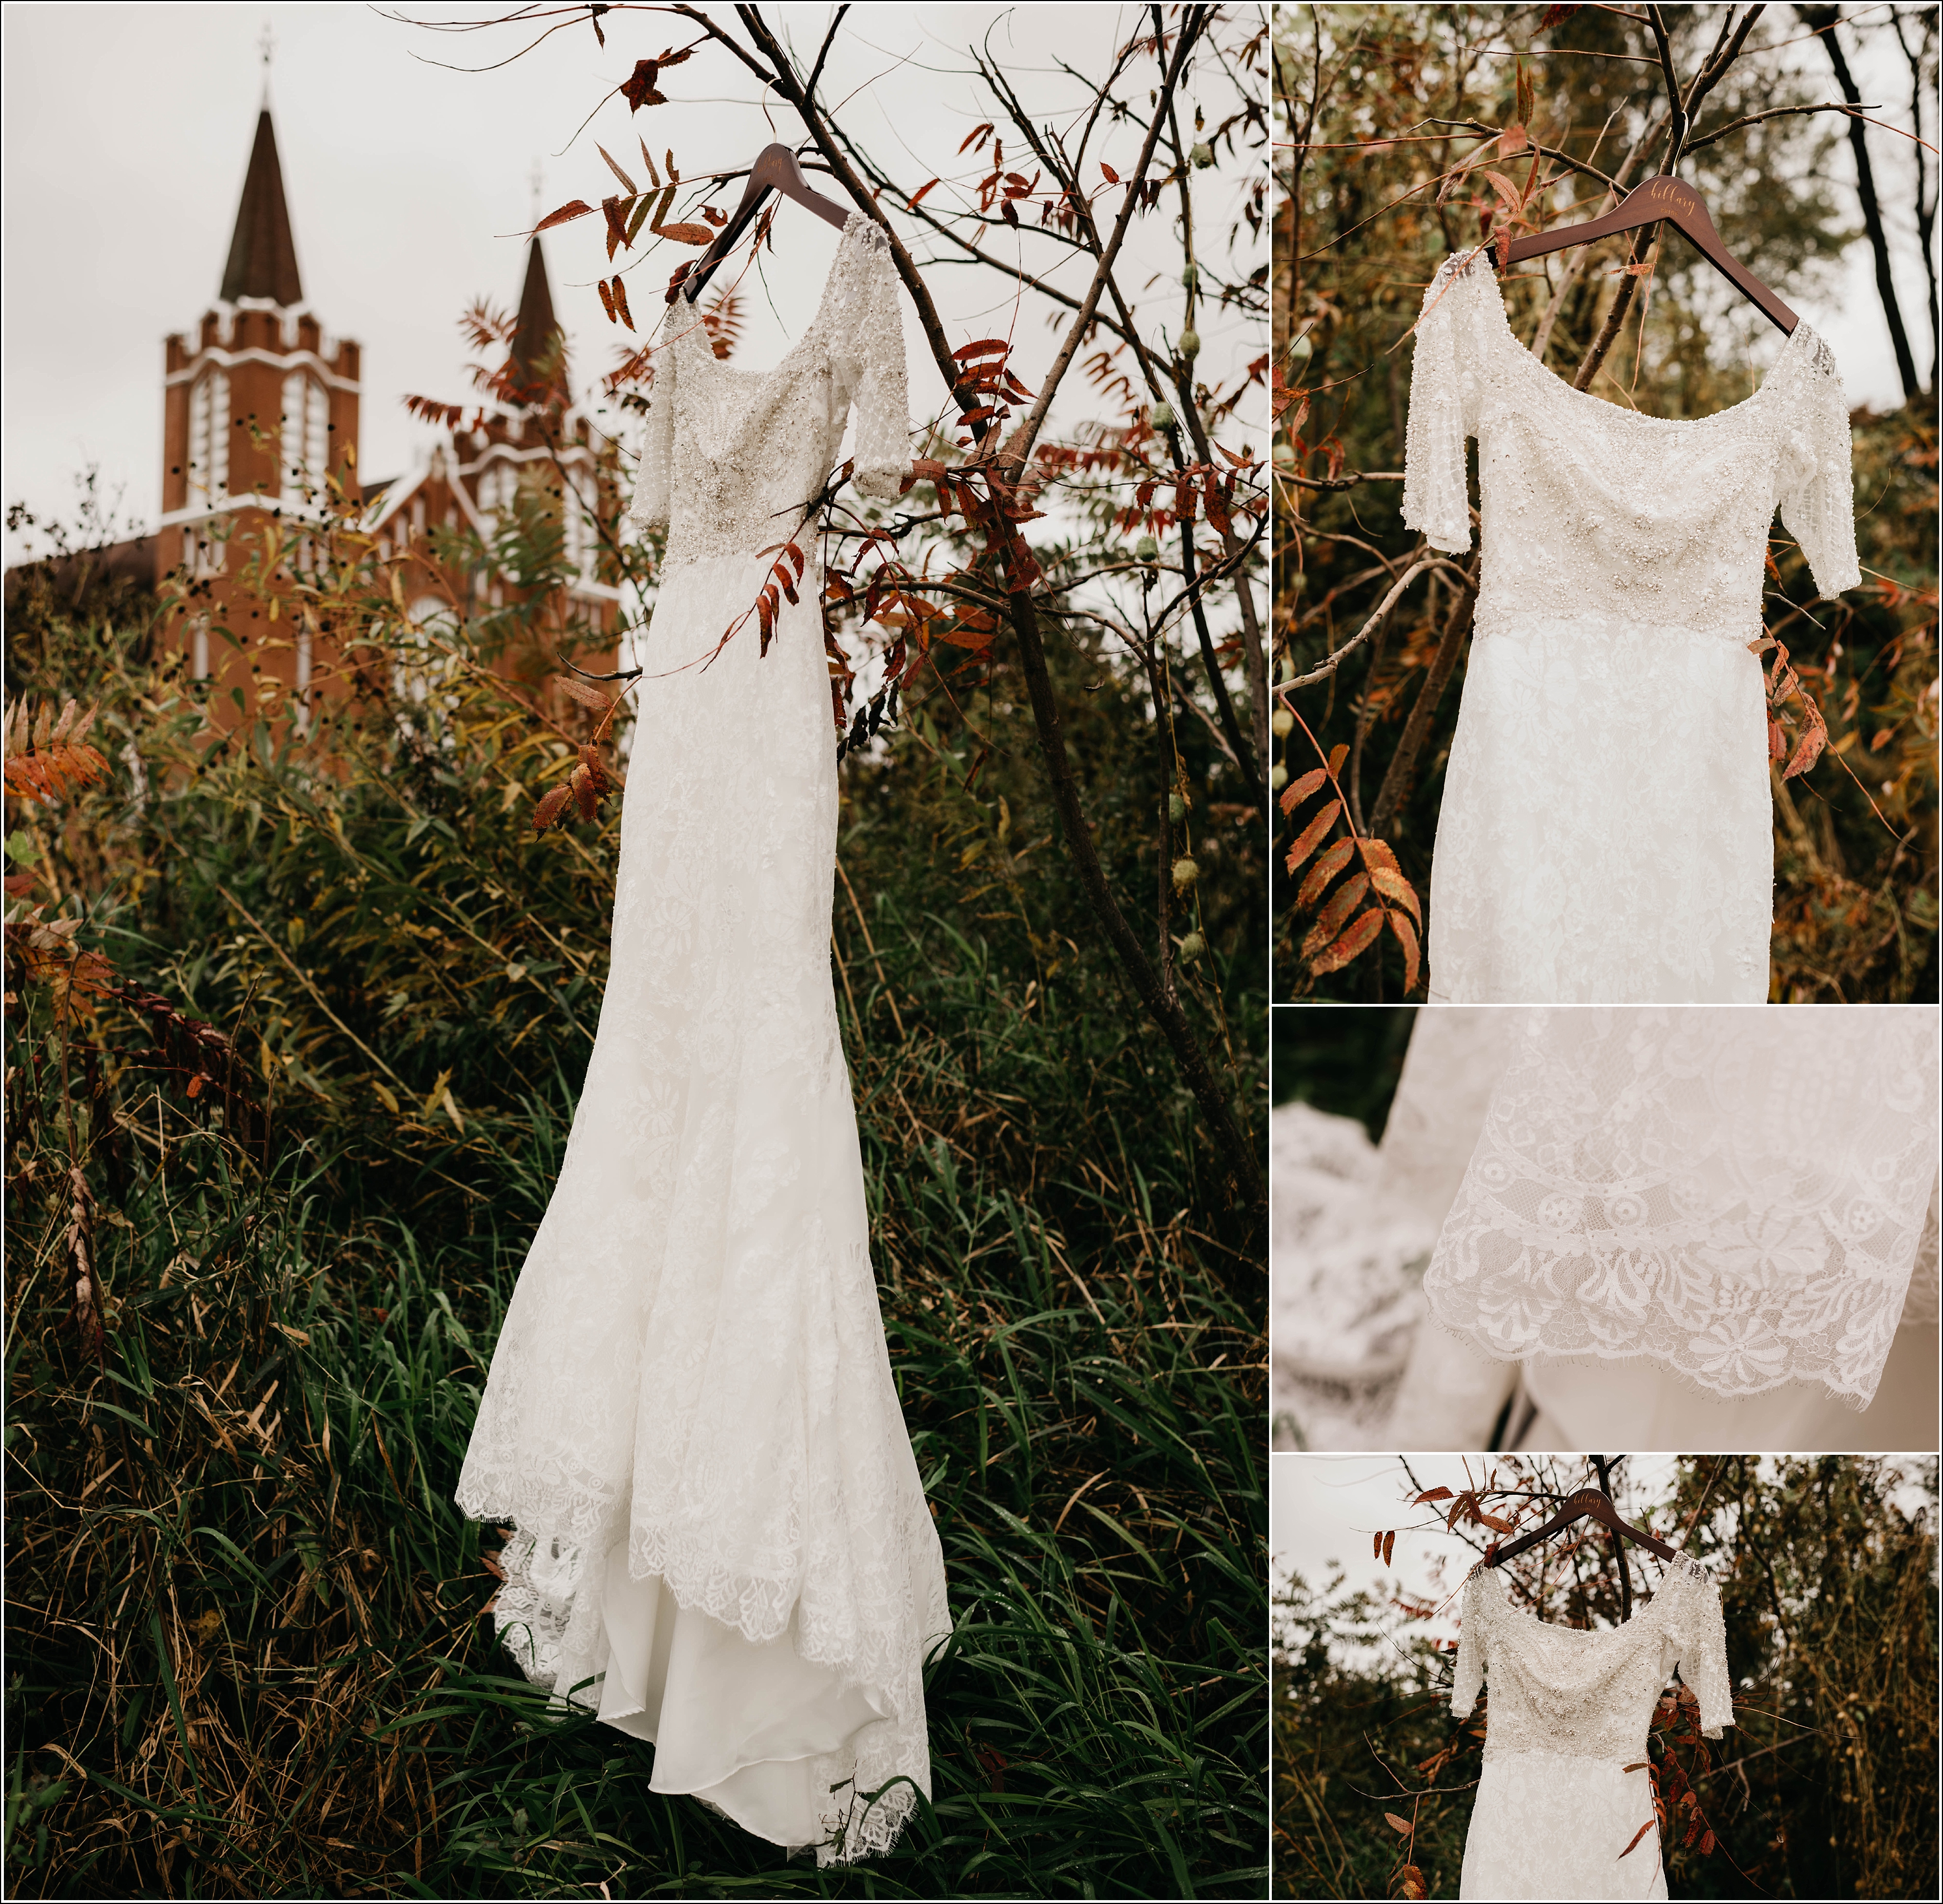 Wedding dress in the beautiful fall colors church in background wedding dress lace details romantic fall wedding